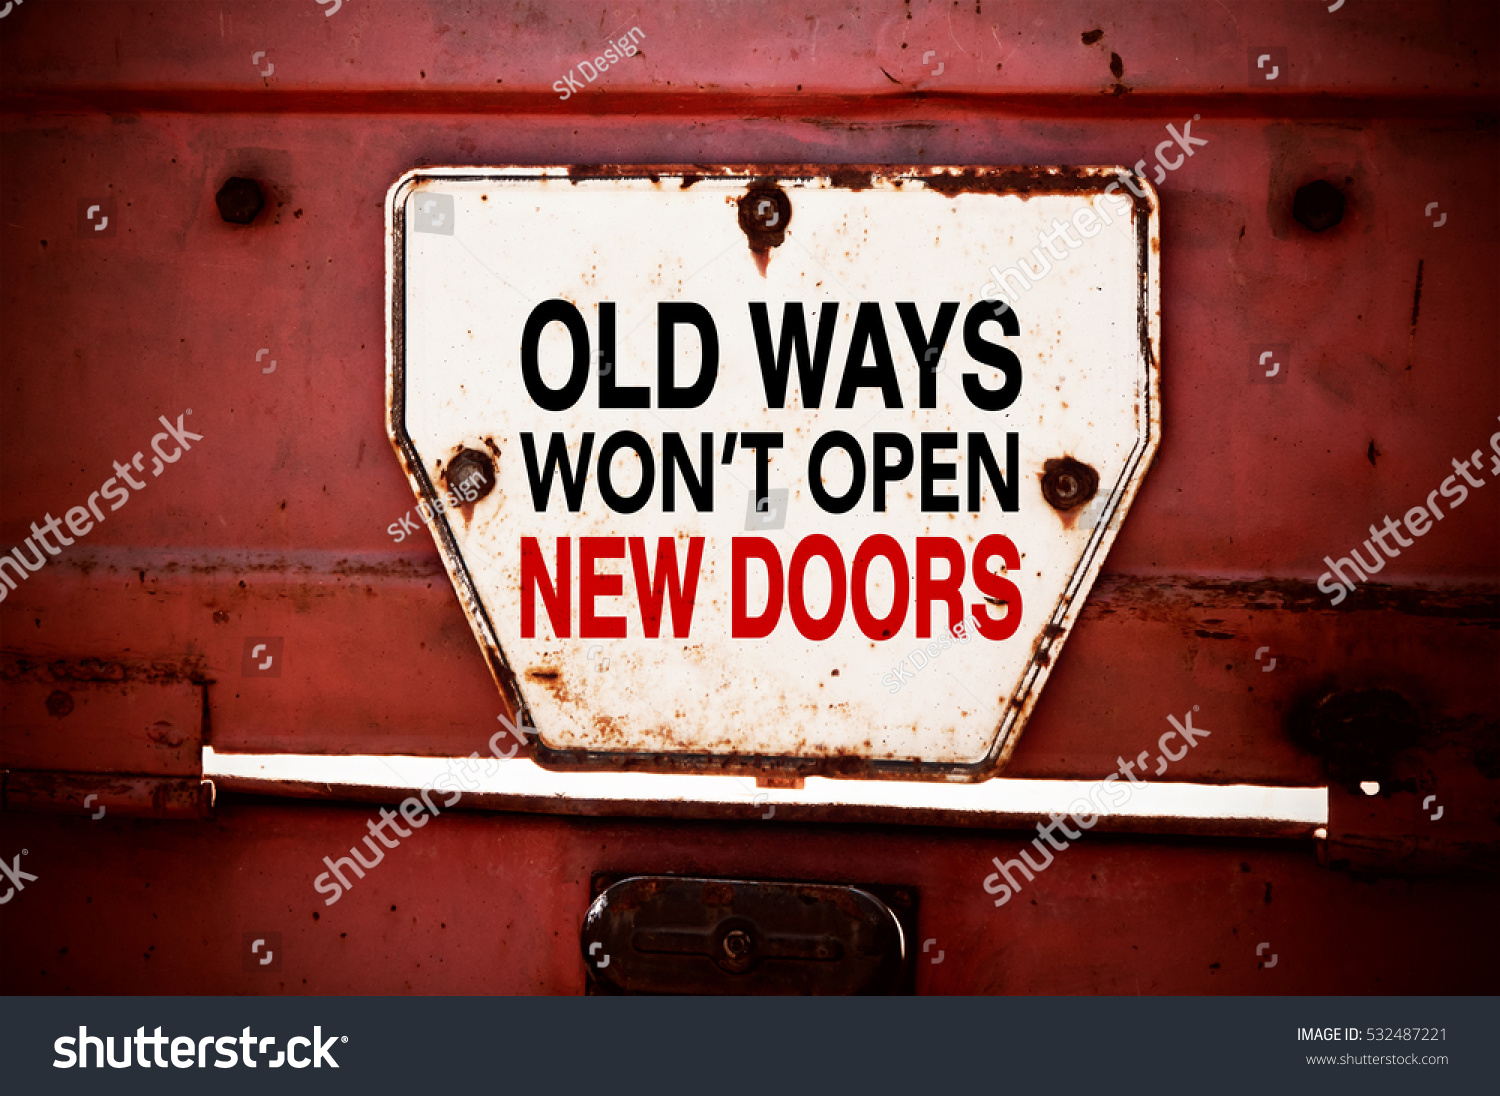 Old Ways Won't Open New Doors. Motivational quote. Innovation and creativity concept written on a grunge iron signboard #532487221